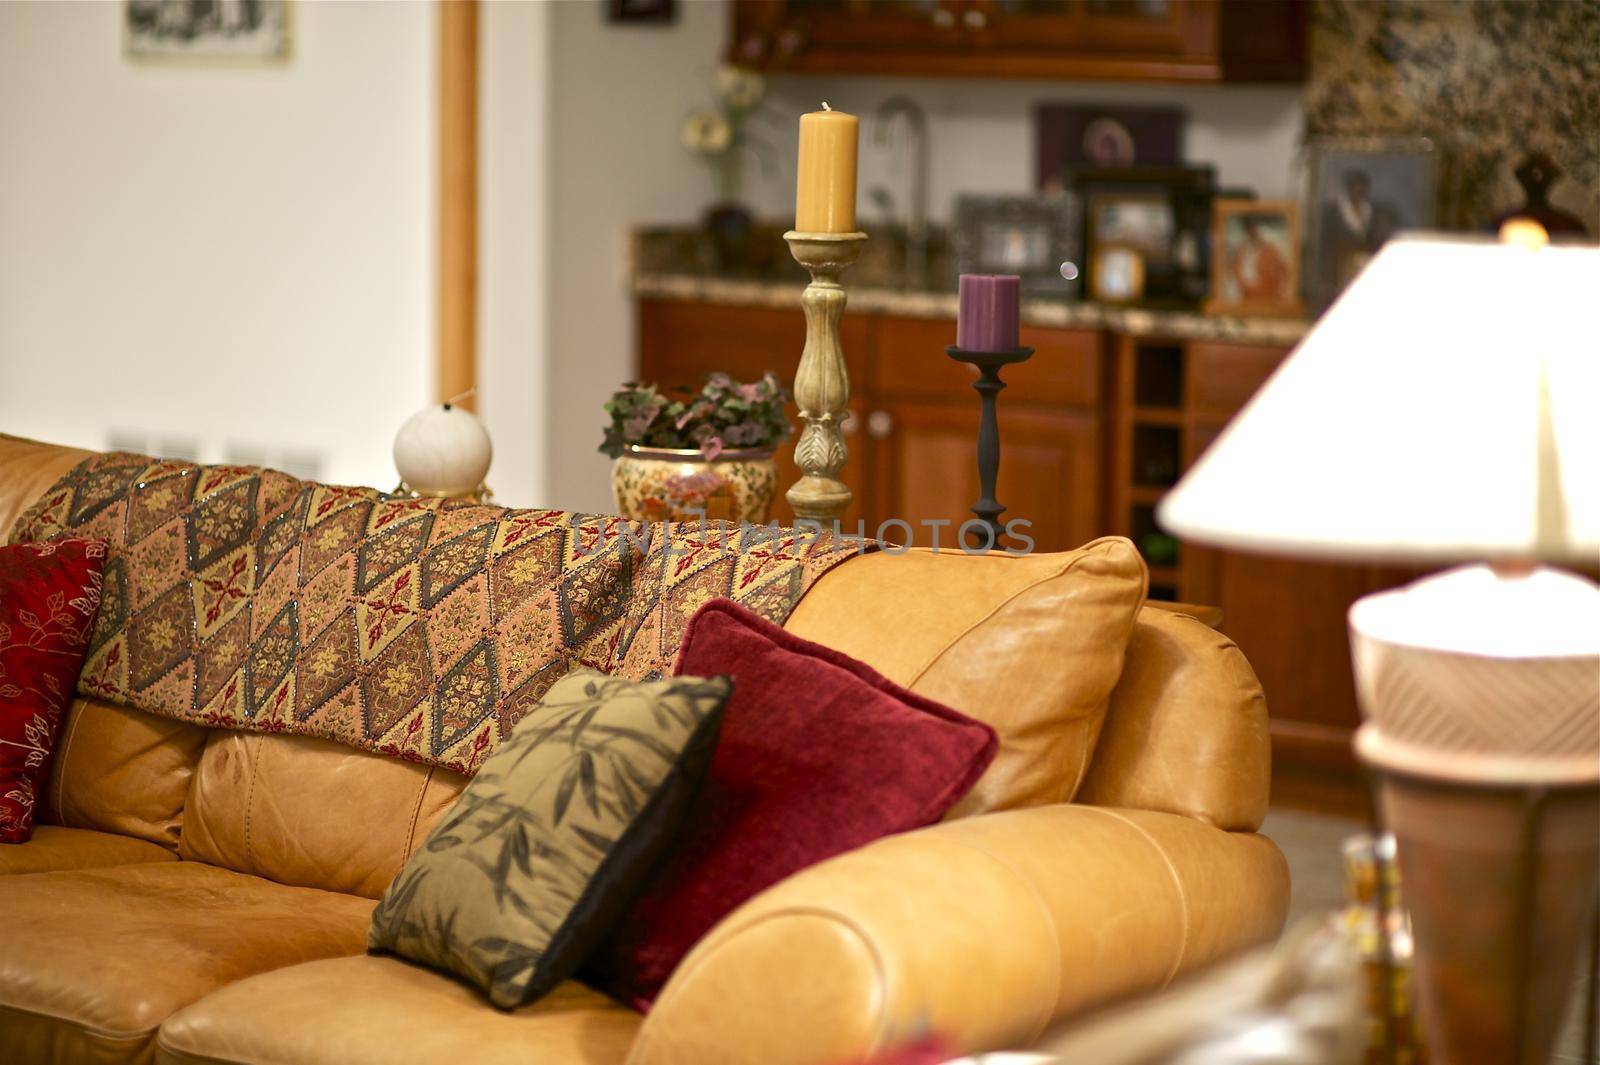 Luxury Home Interior - Living Room. Leather Orange Sofa, Decorative Pillows and Candles.